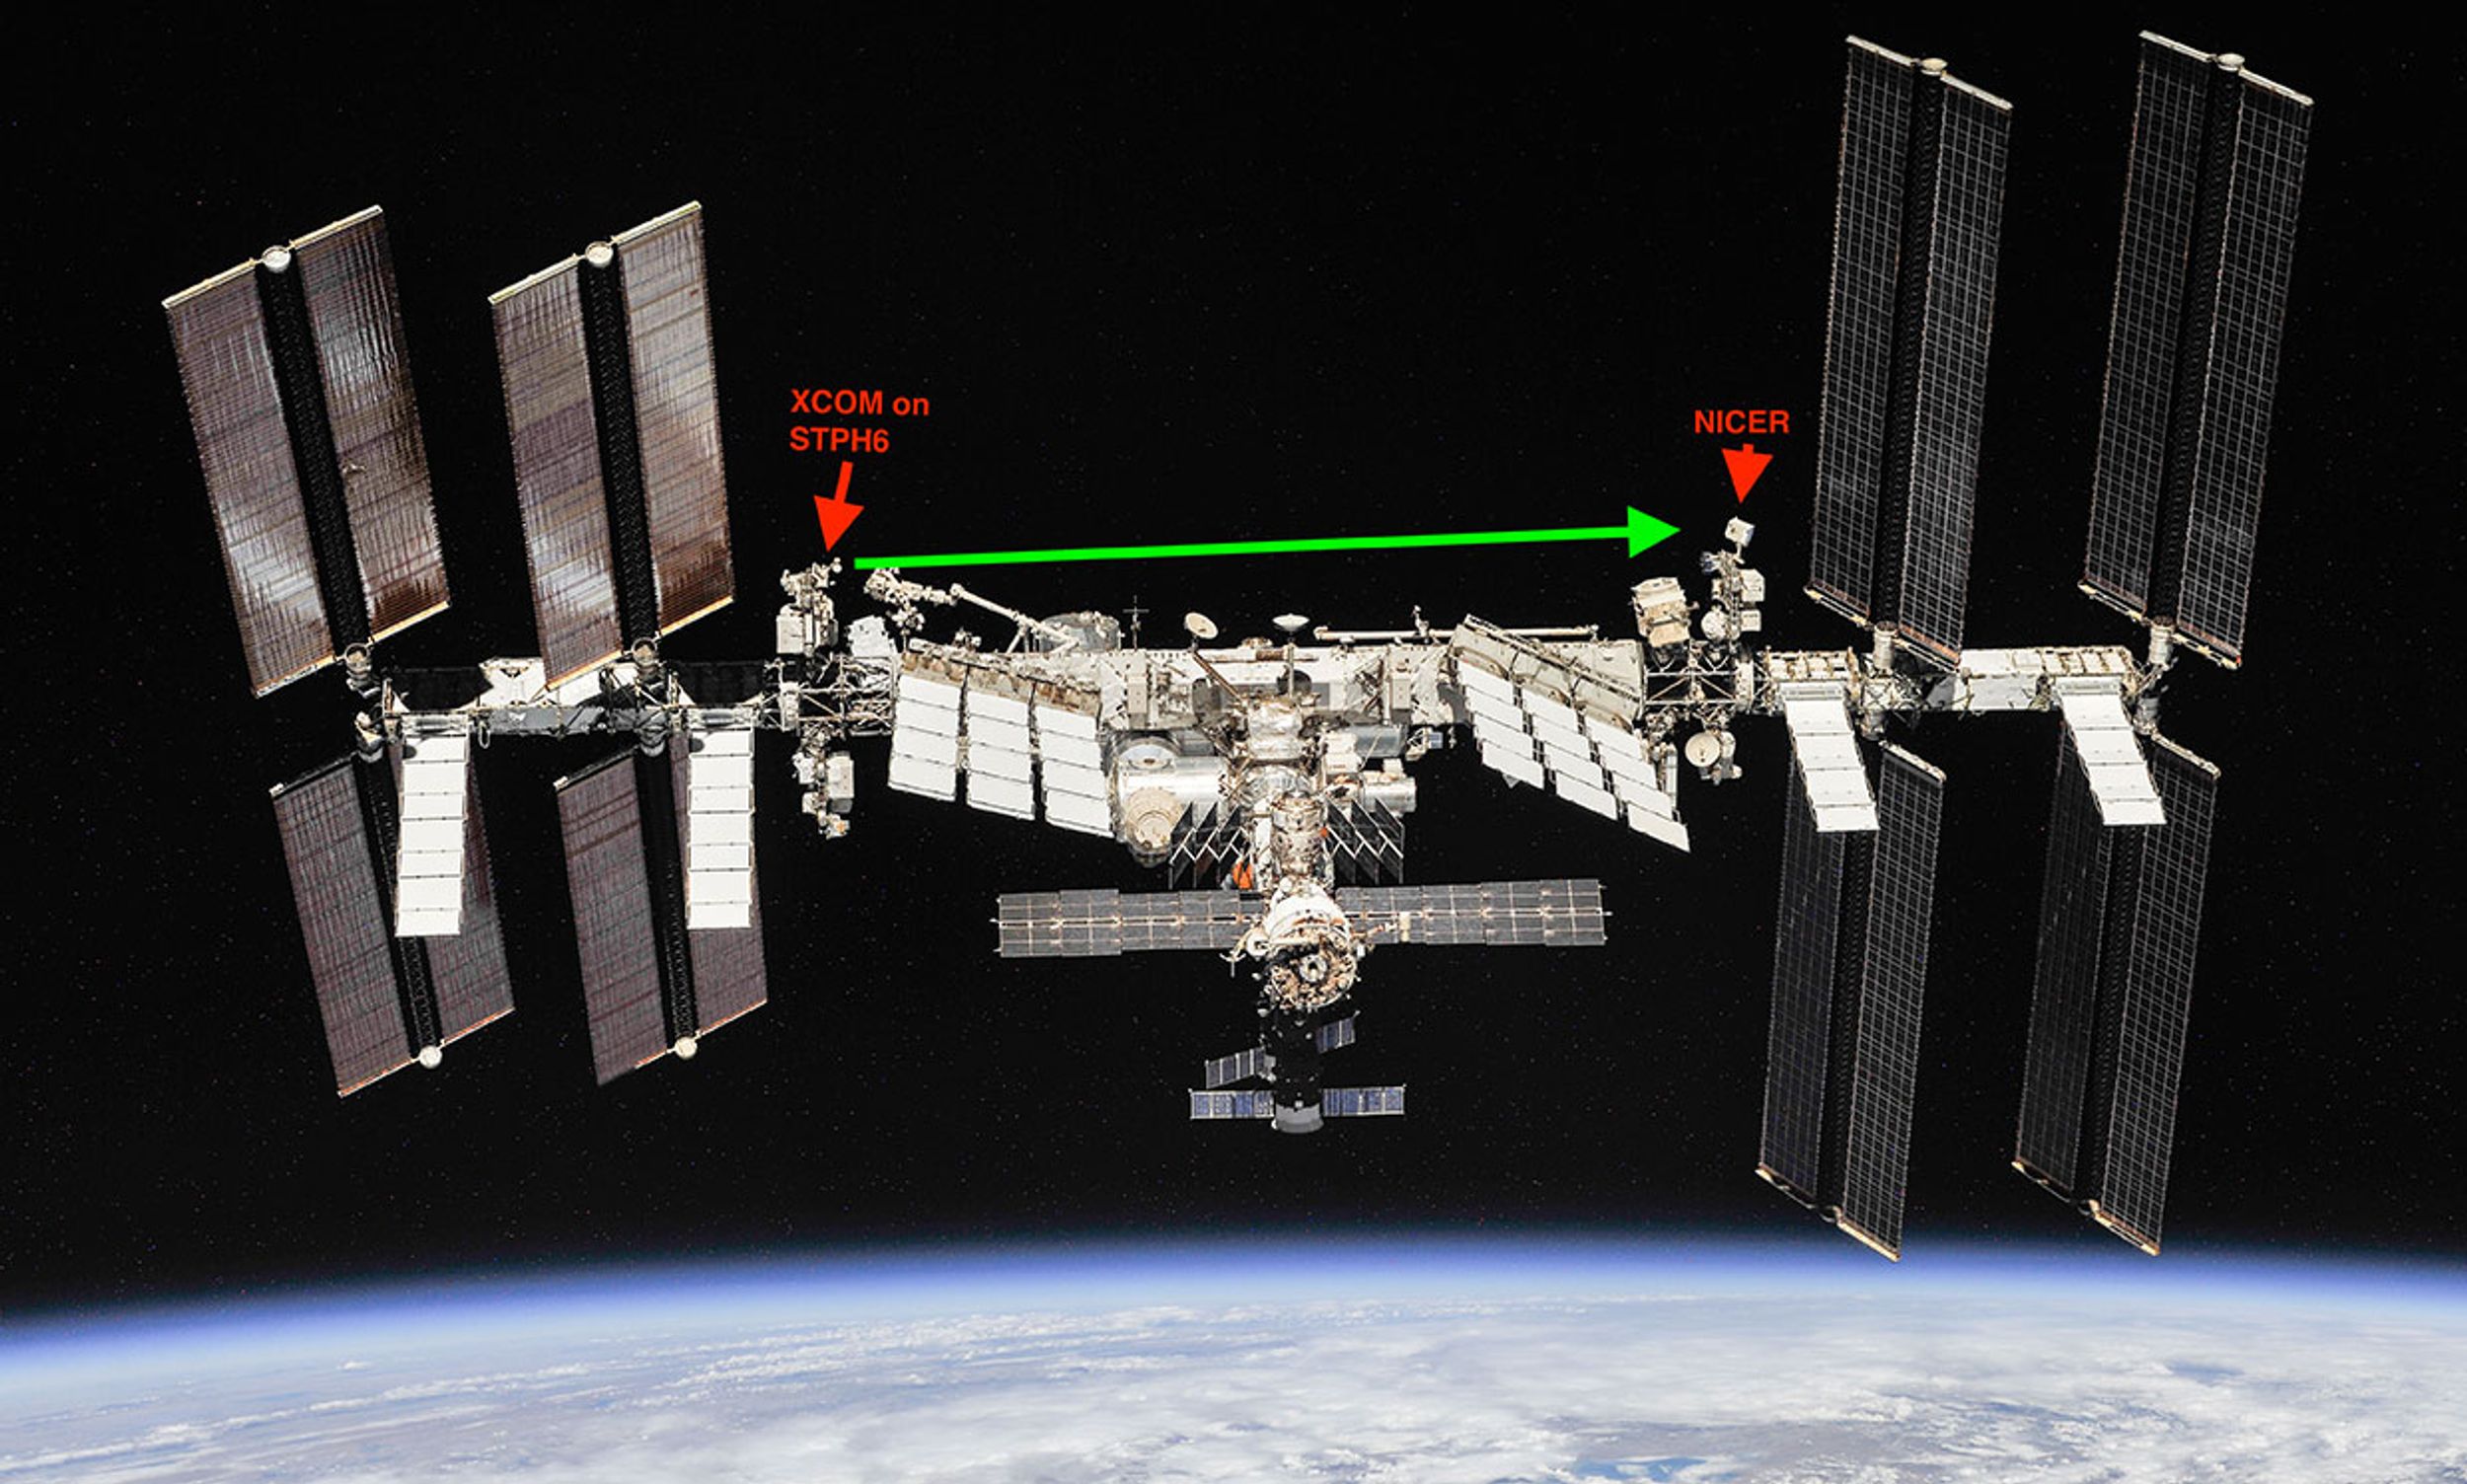 This image of the International Space Station shows the locations of the Modulated X-ray Source and the Neutron star Interior Composition Explorer, or NICER, which are critical to the demonstration.